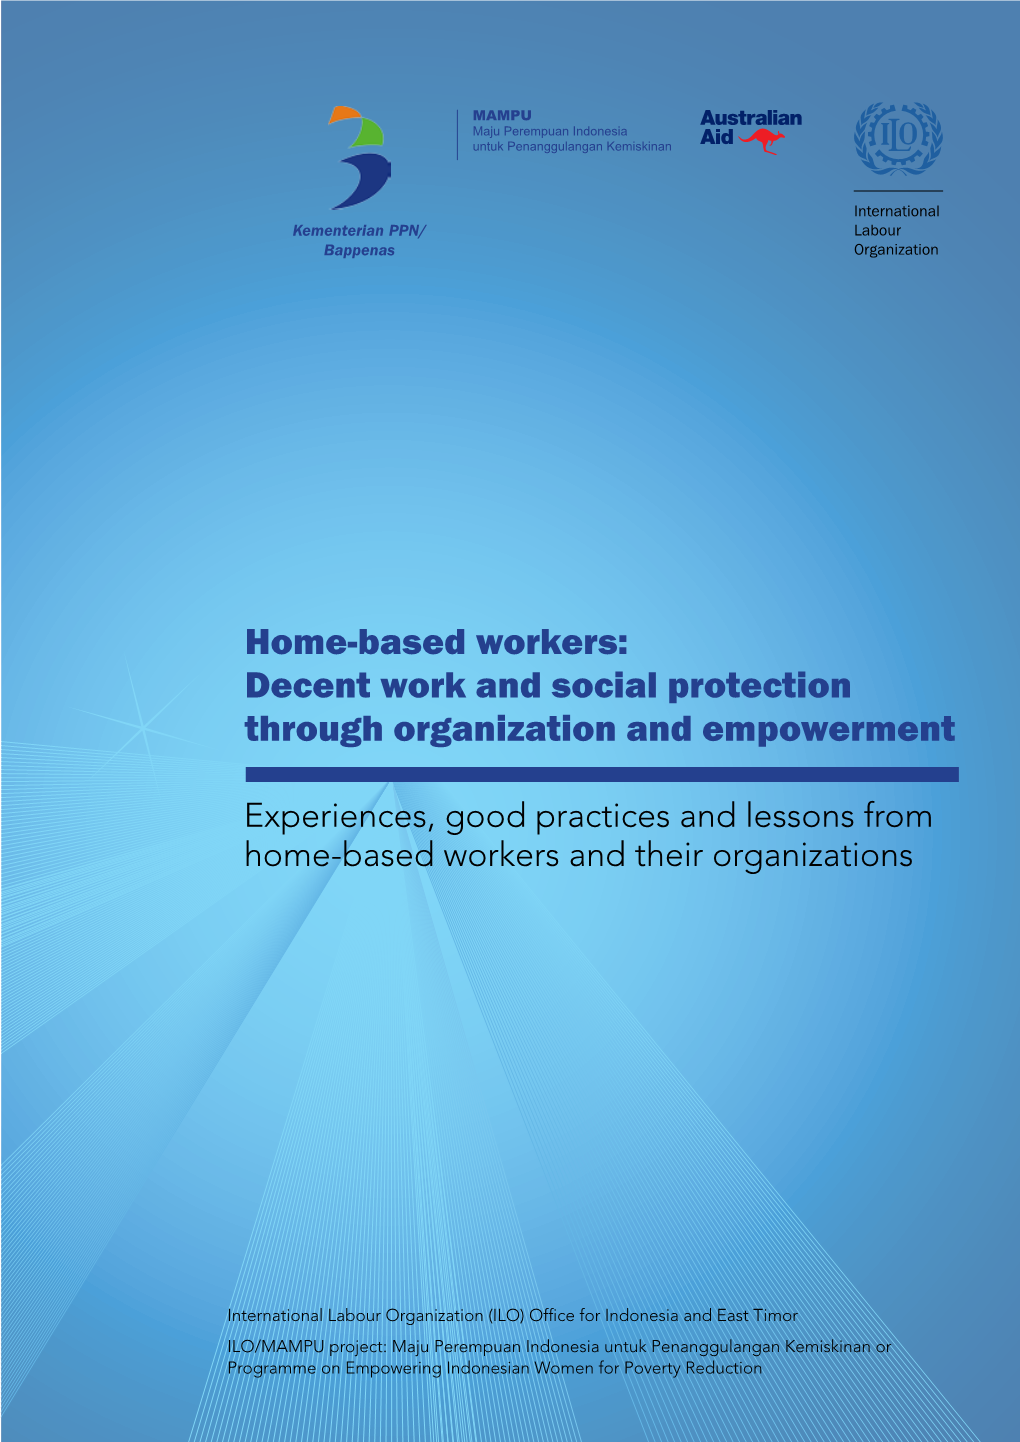 Home-Based Workers: Decent Work and Social Protection Through Organization and Empowerment